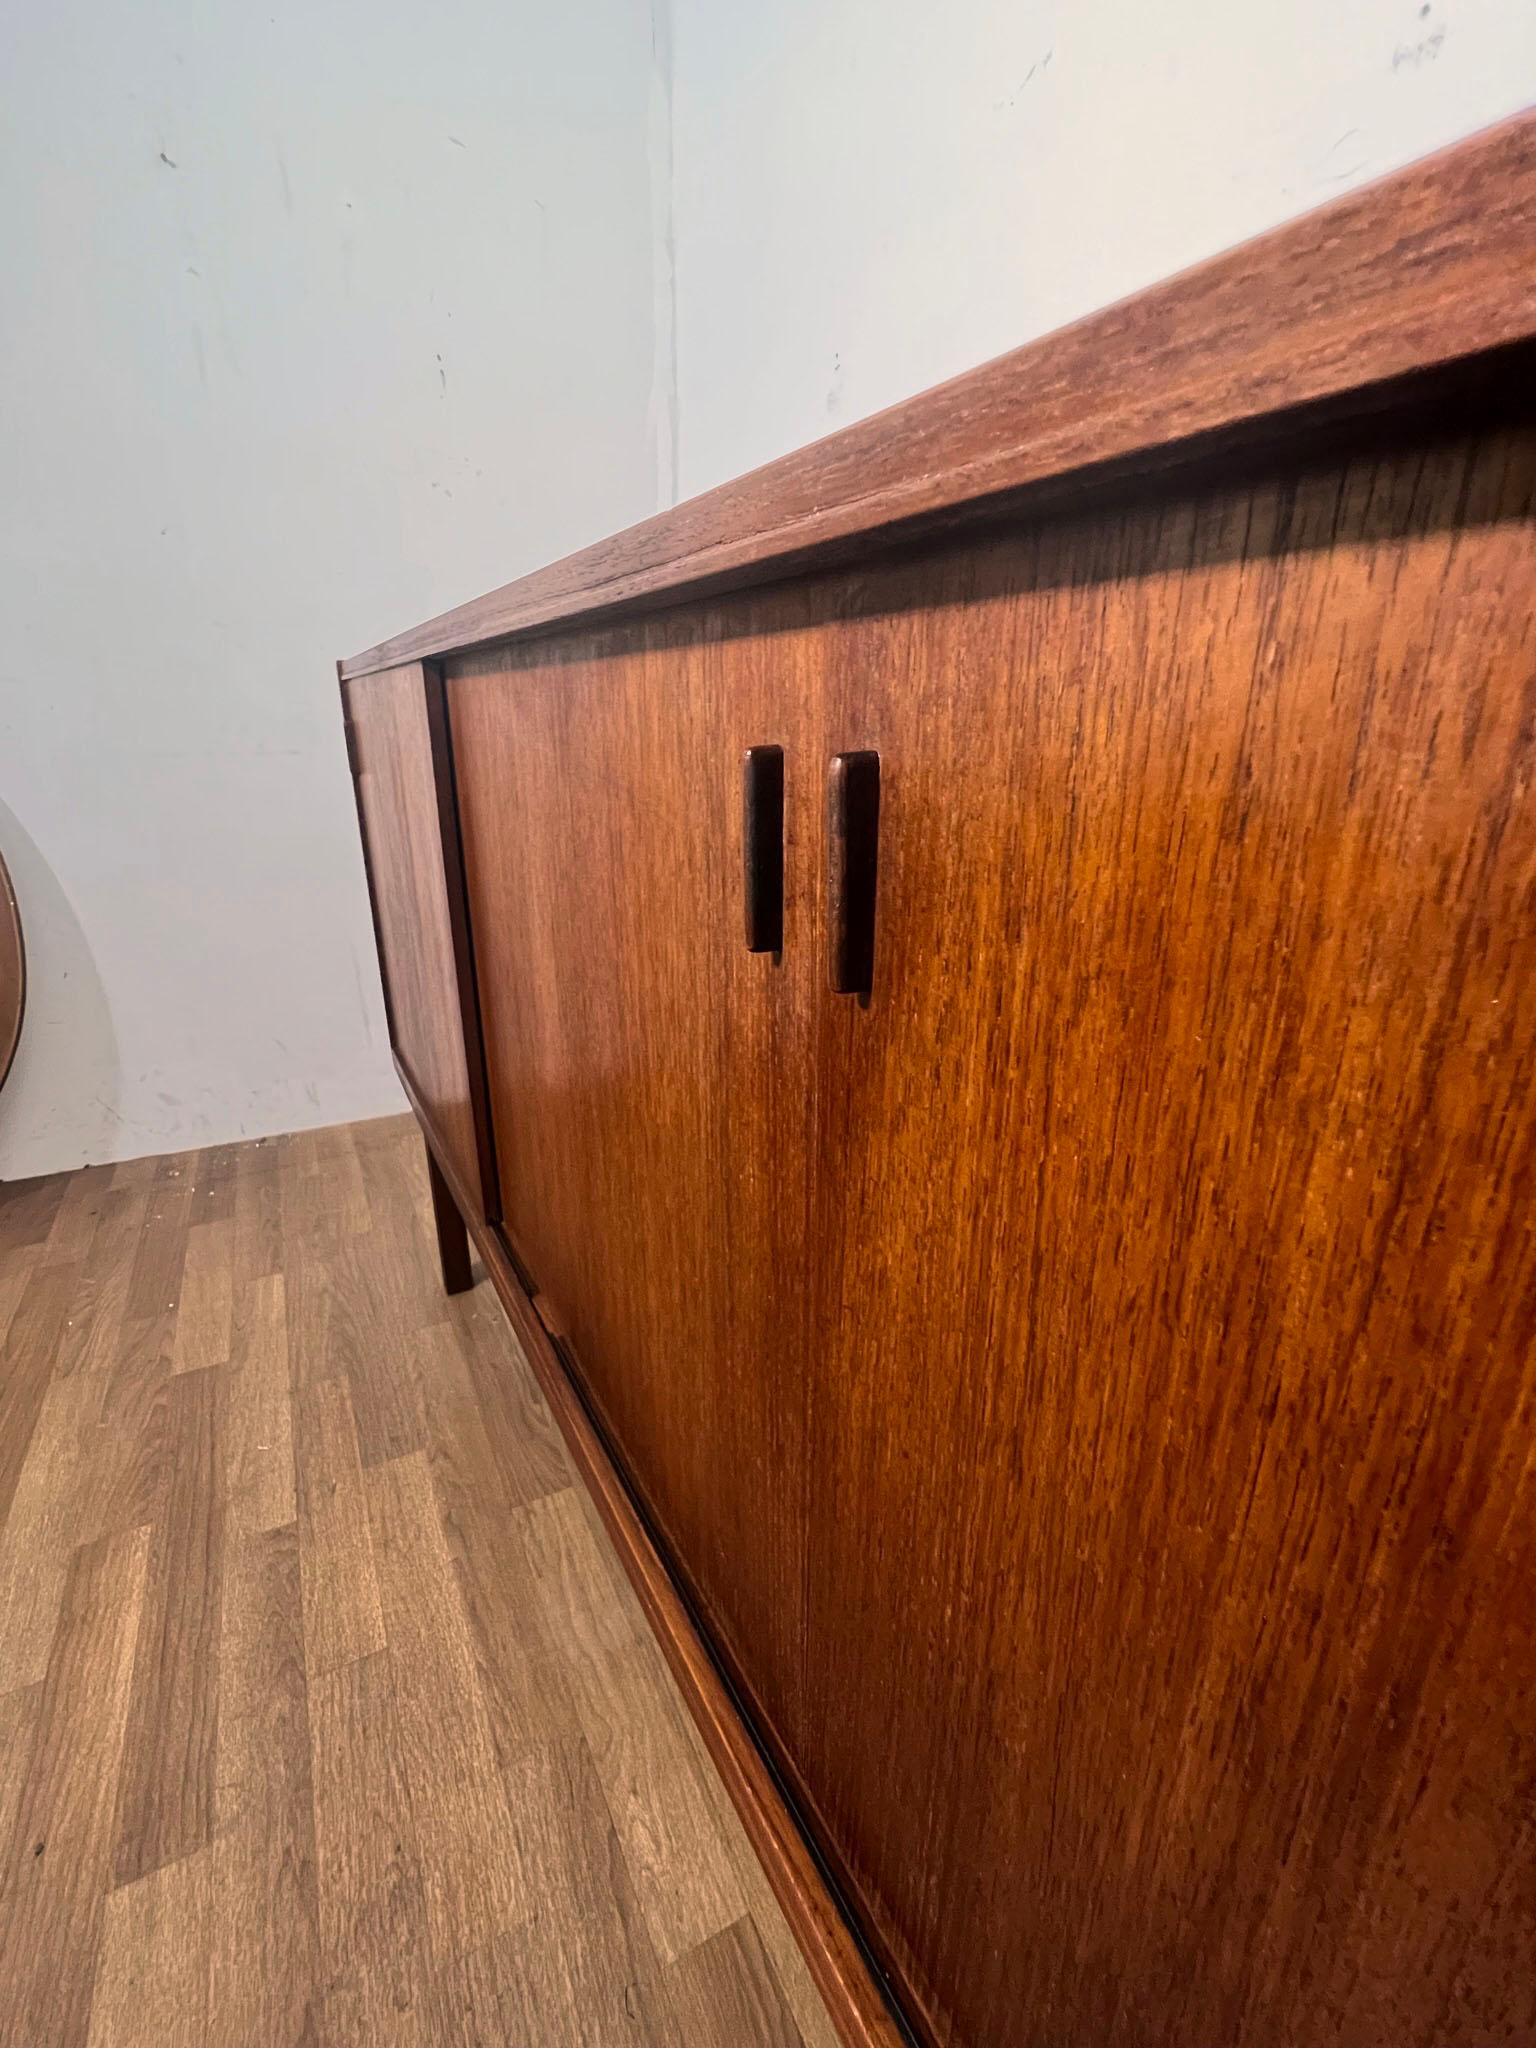 Danish Teak Four Door Sideboard Circa 1960s In Good Condition For Sale In Peabody, MA